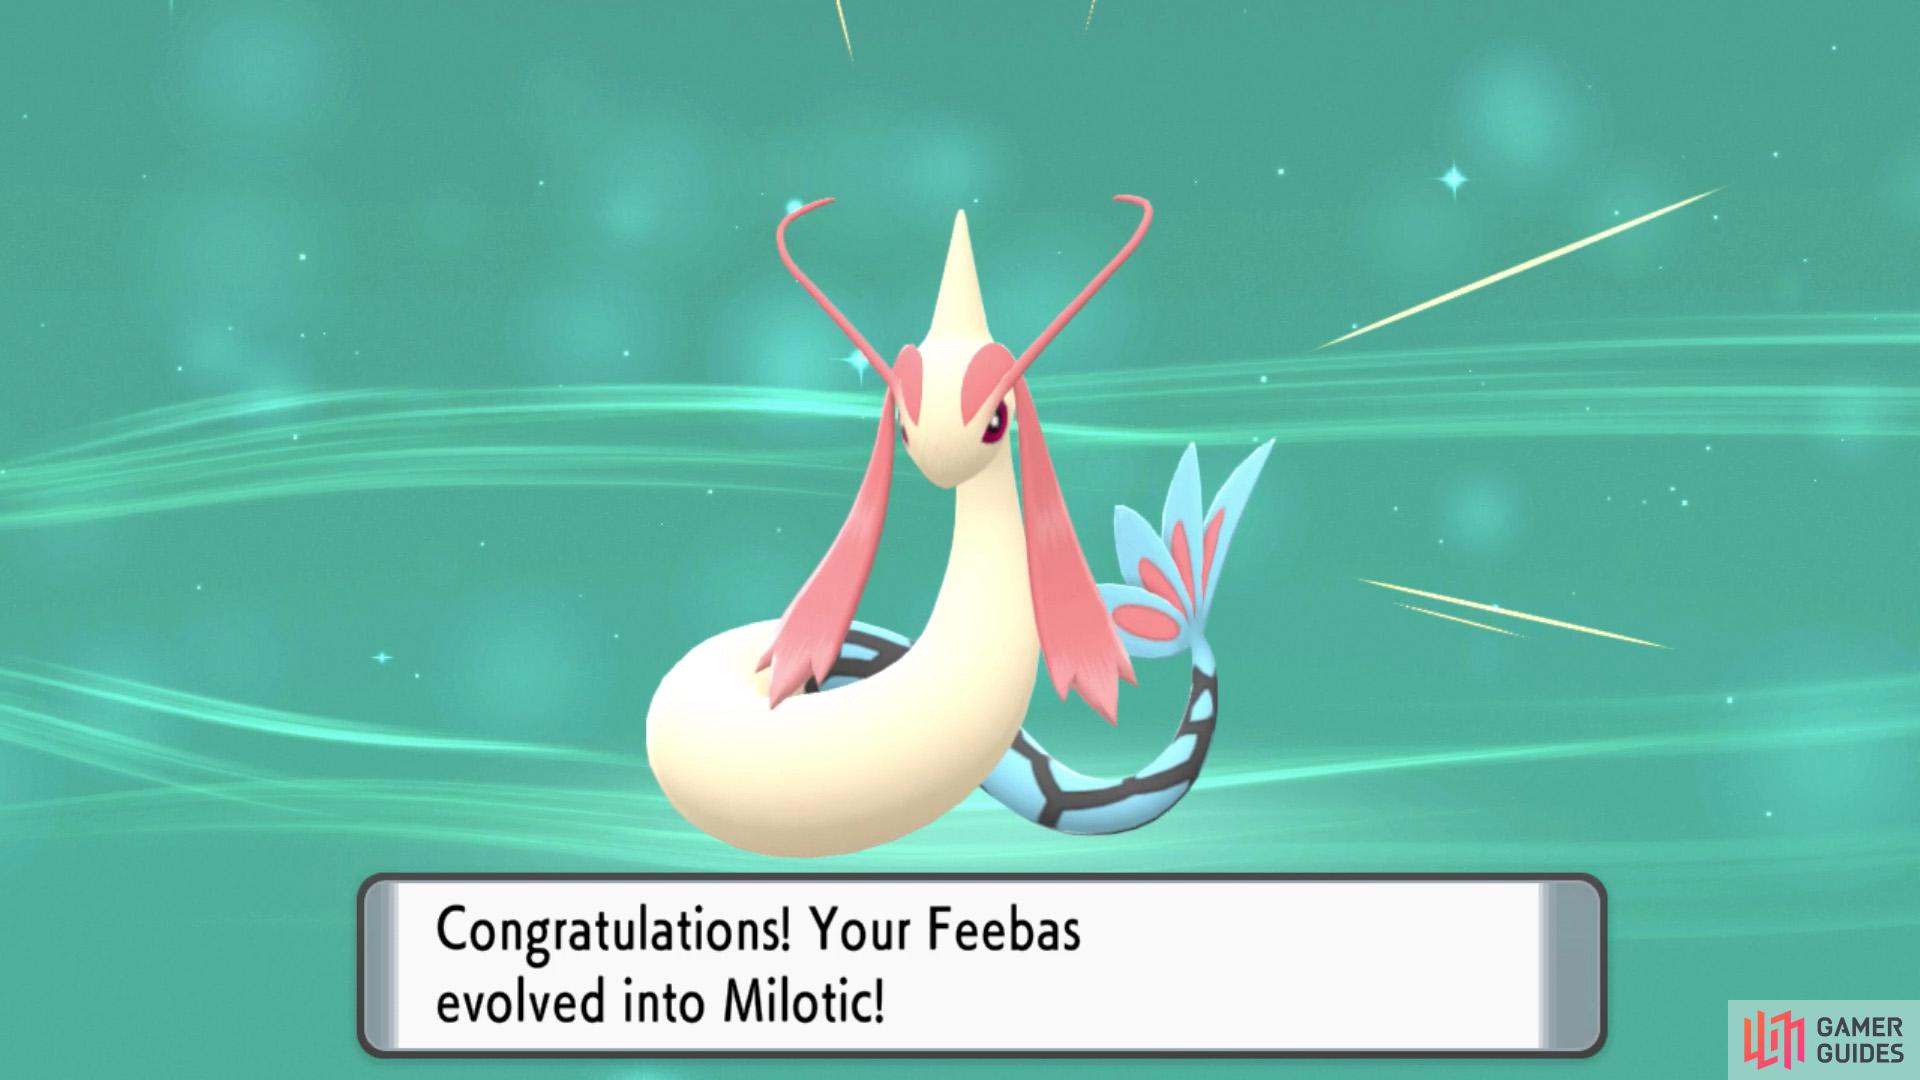 …And it should evolve into the marvelous Milotic!